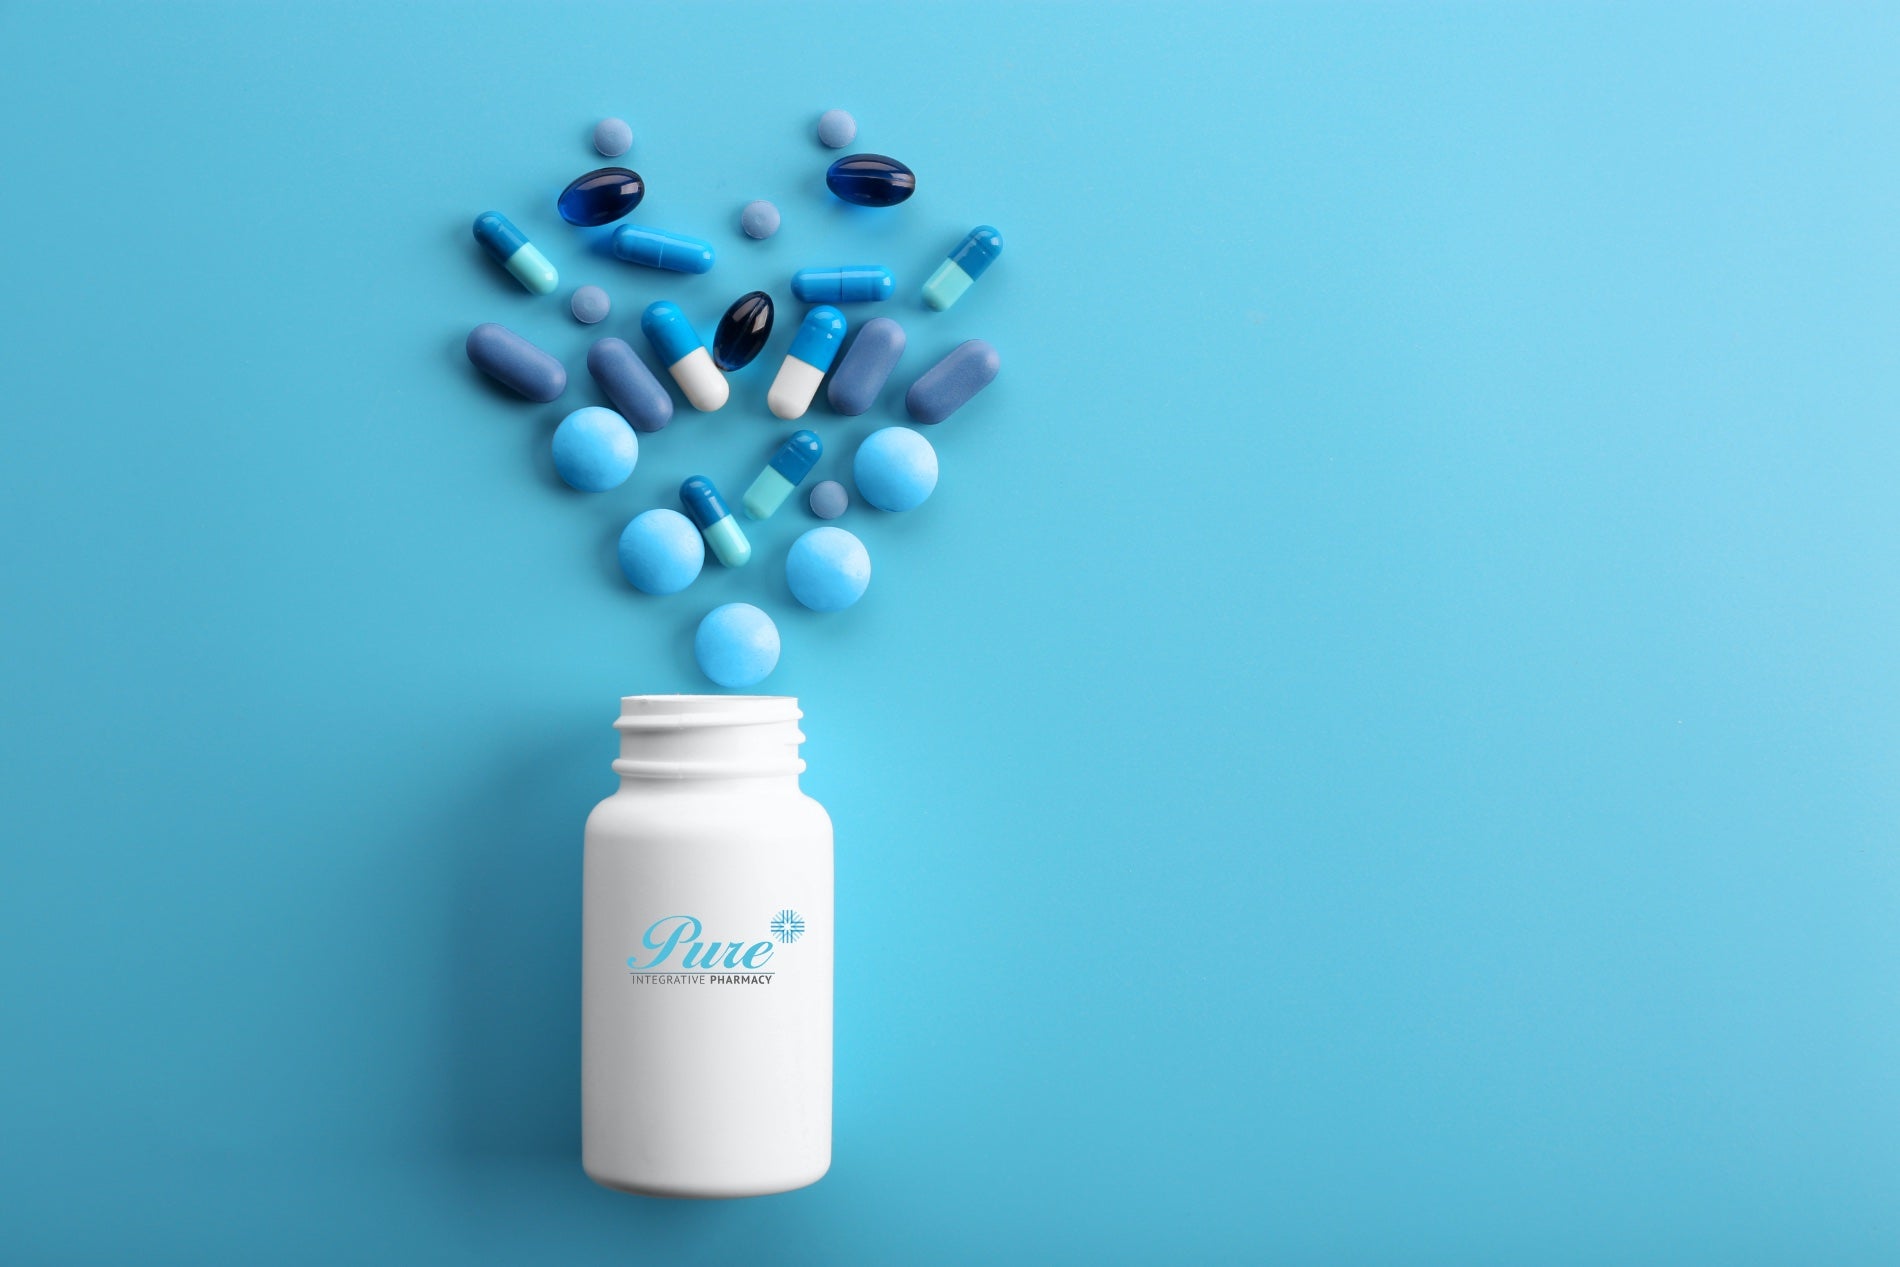 Pills laid out in a heart shape above a Pure-branded bottle on a blue background